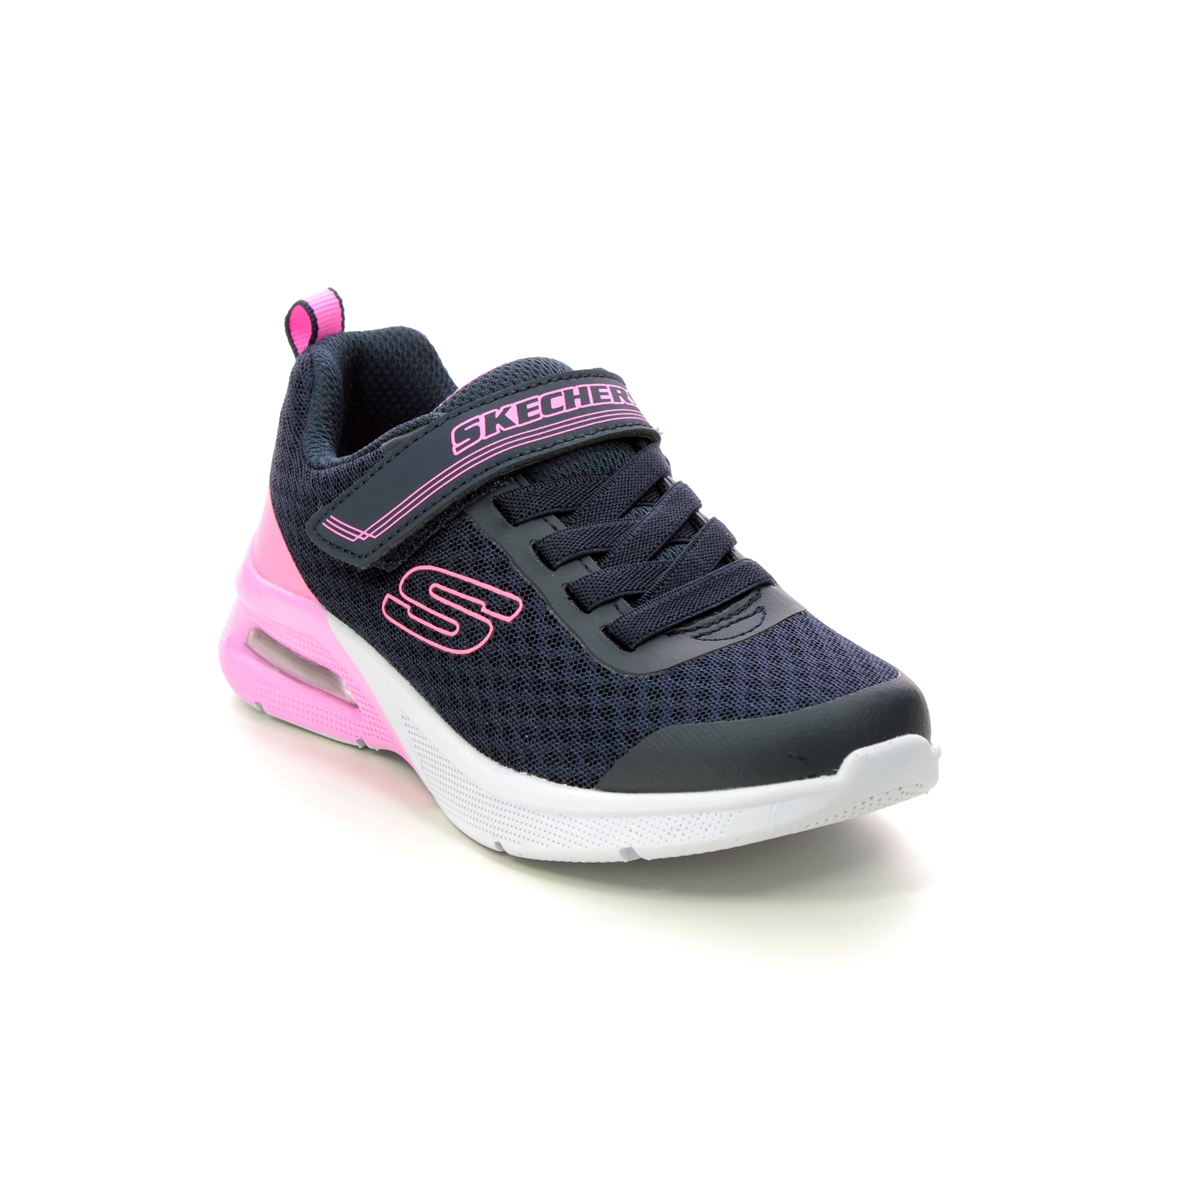 Skechers Microspec Max Bungee NVY Navy Kids girls trainers 302343L in a Plain Textile in Size 36